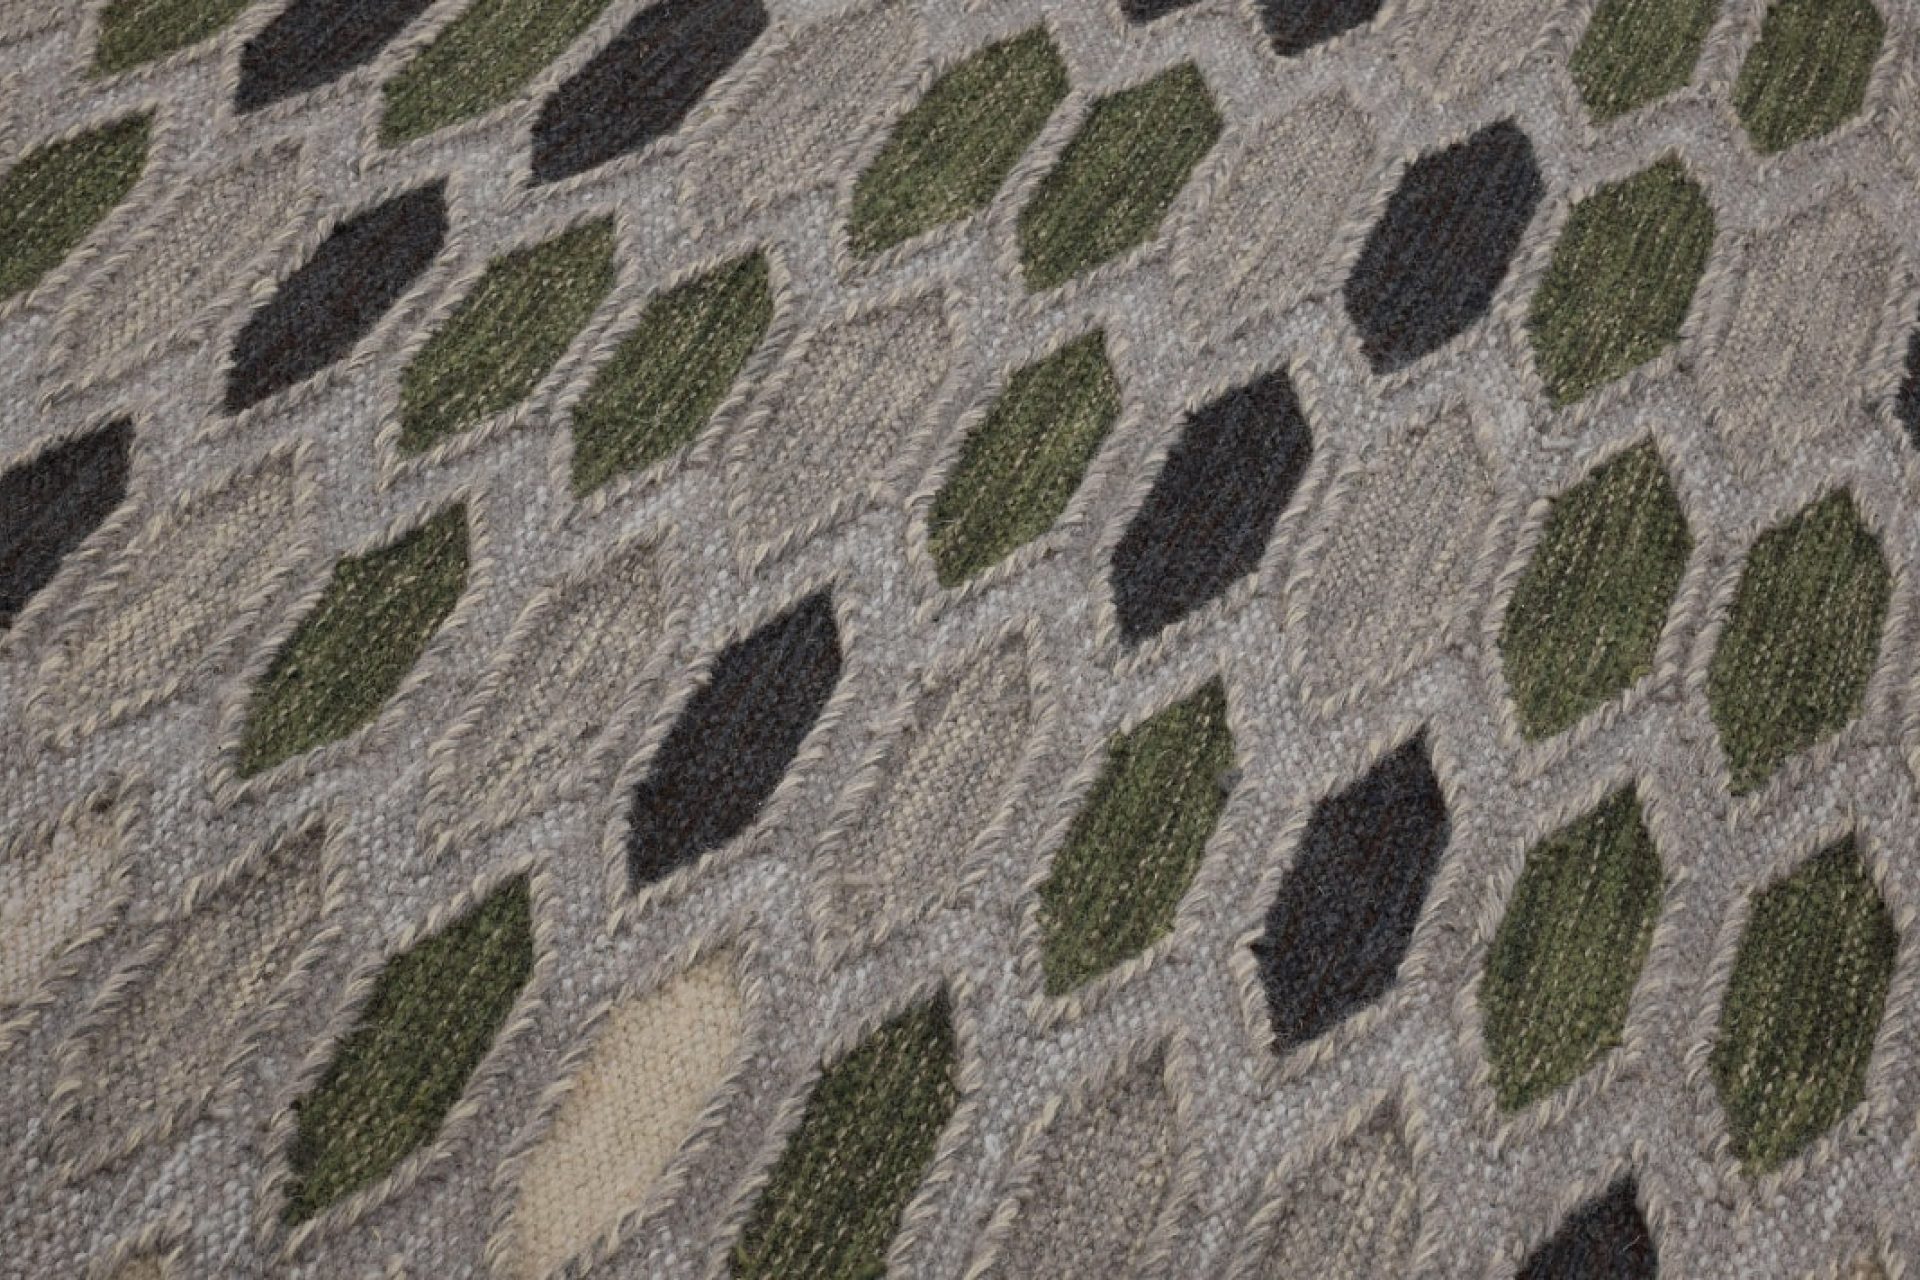 Image showing a section of a designer rug with an hexagonal pattern in beige, green and grey